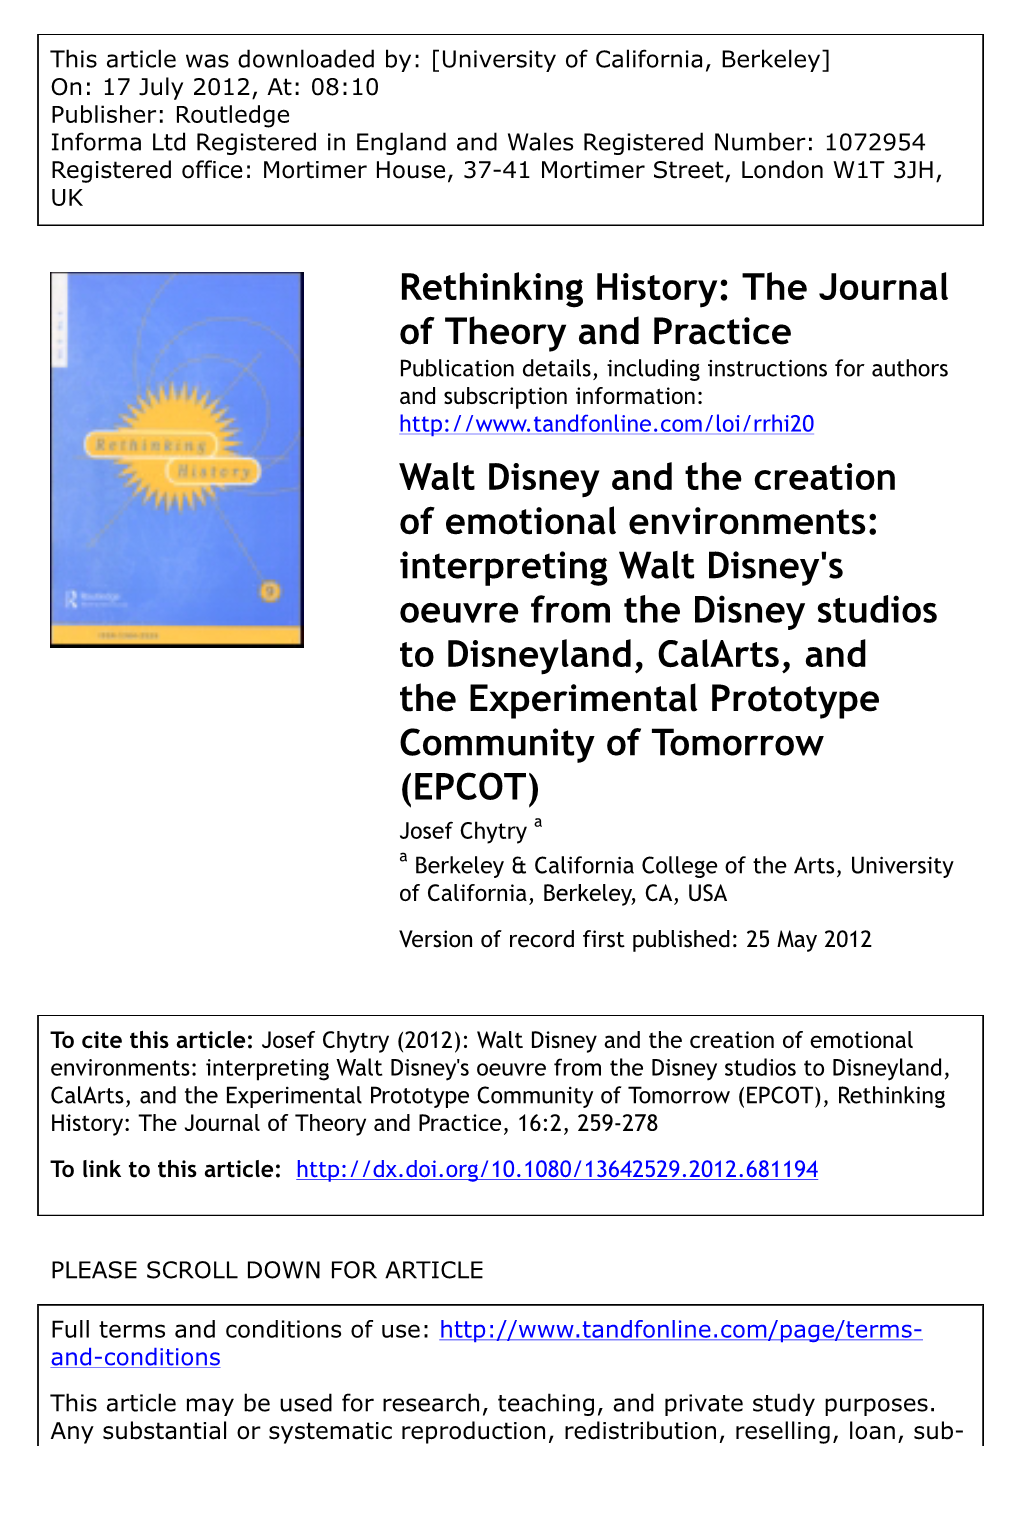 Walt Disney and the Creation of Emotional Environments